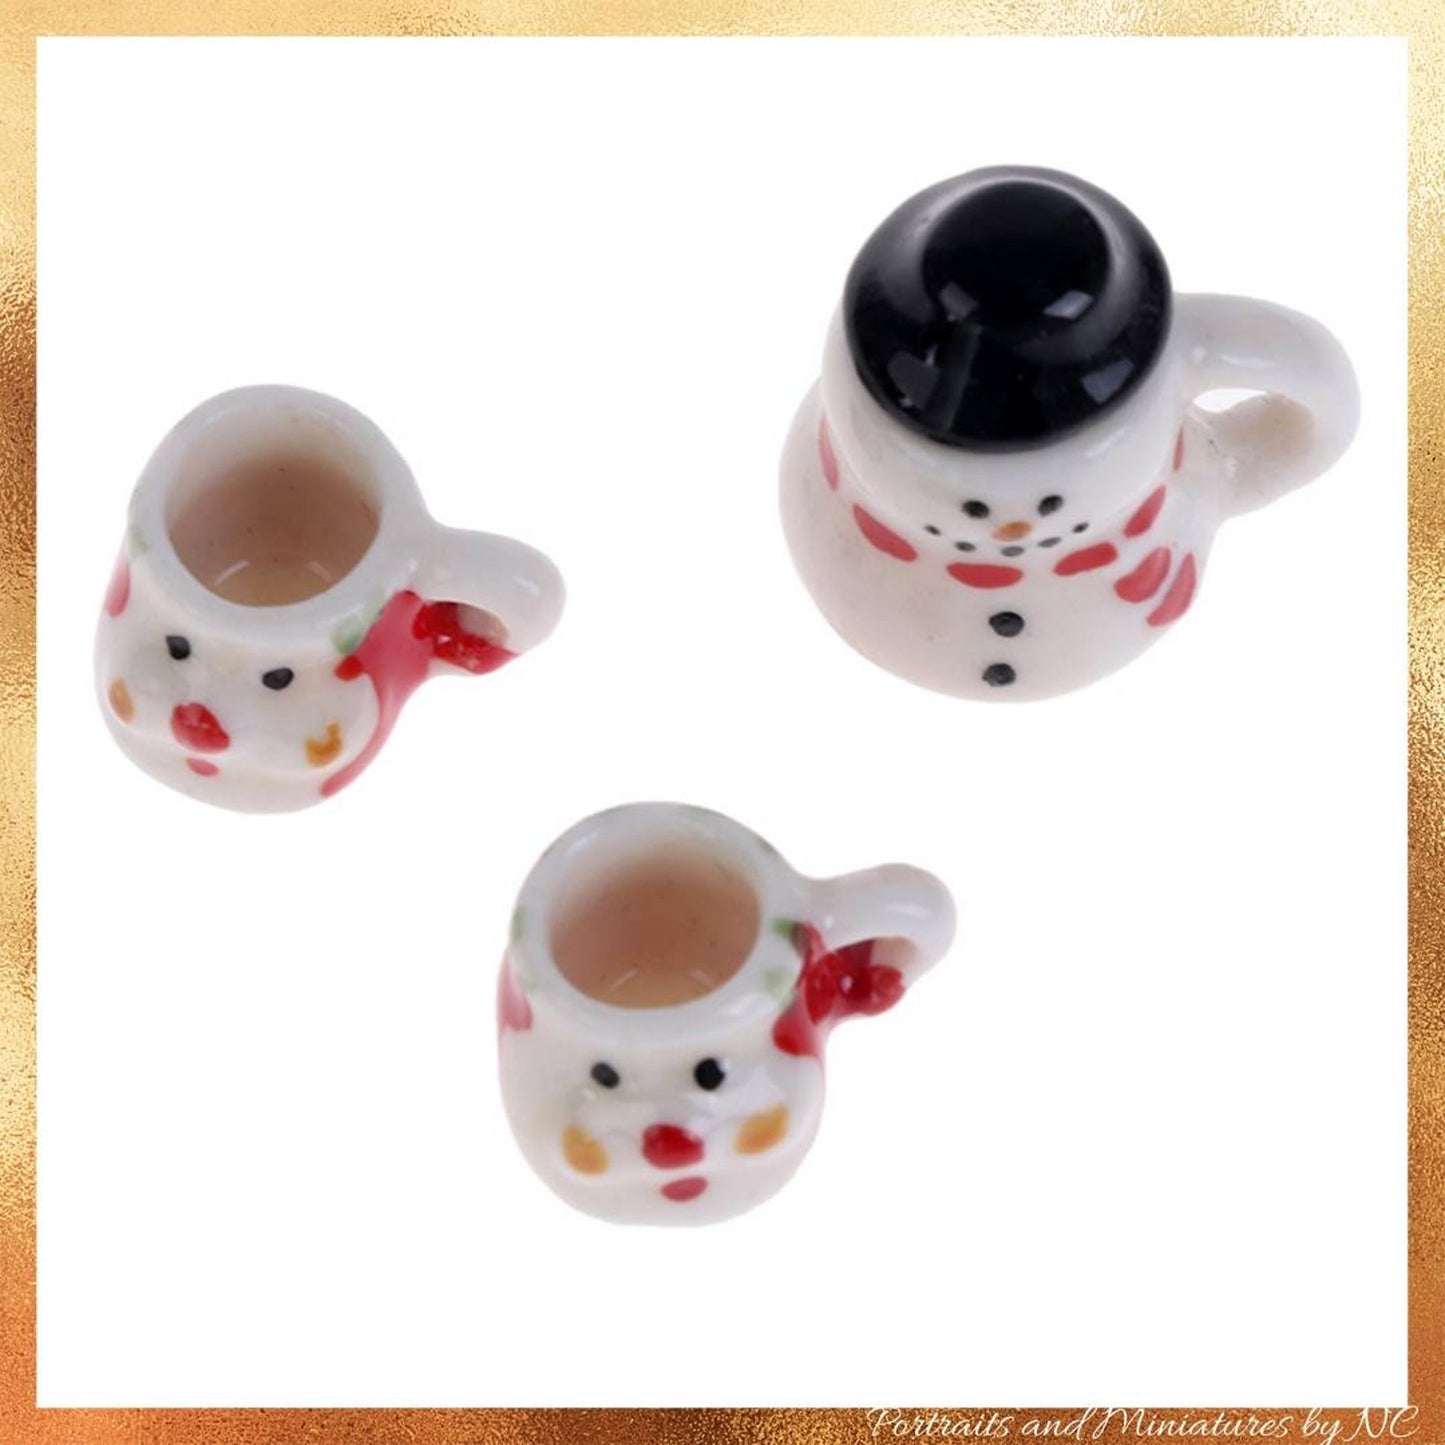 Snowman Teaset from above